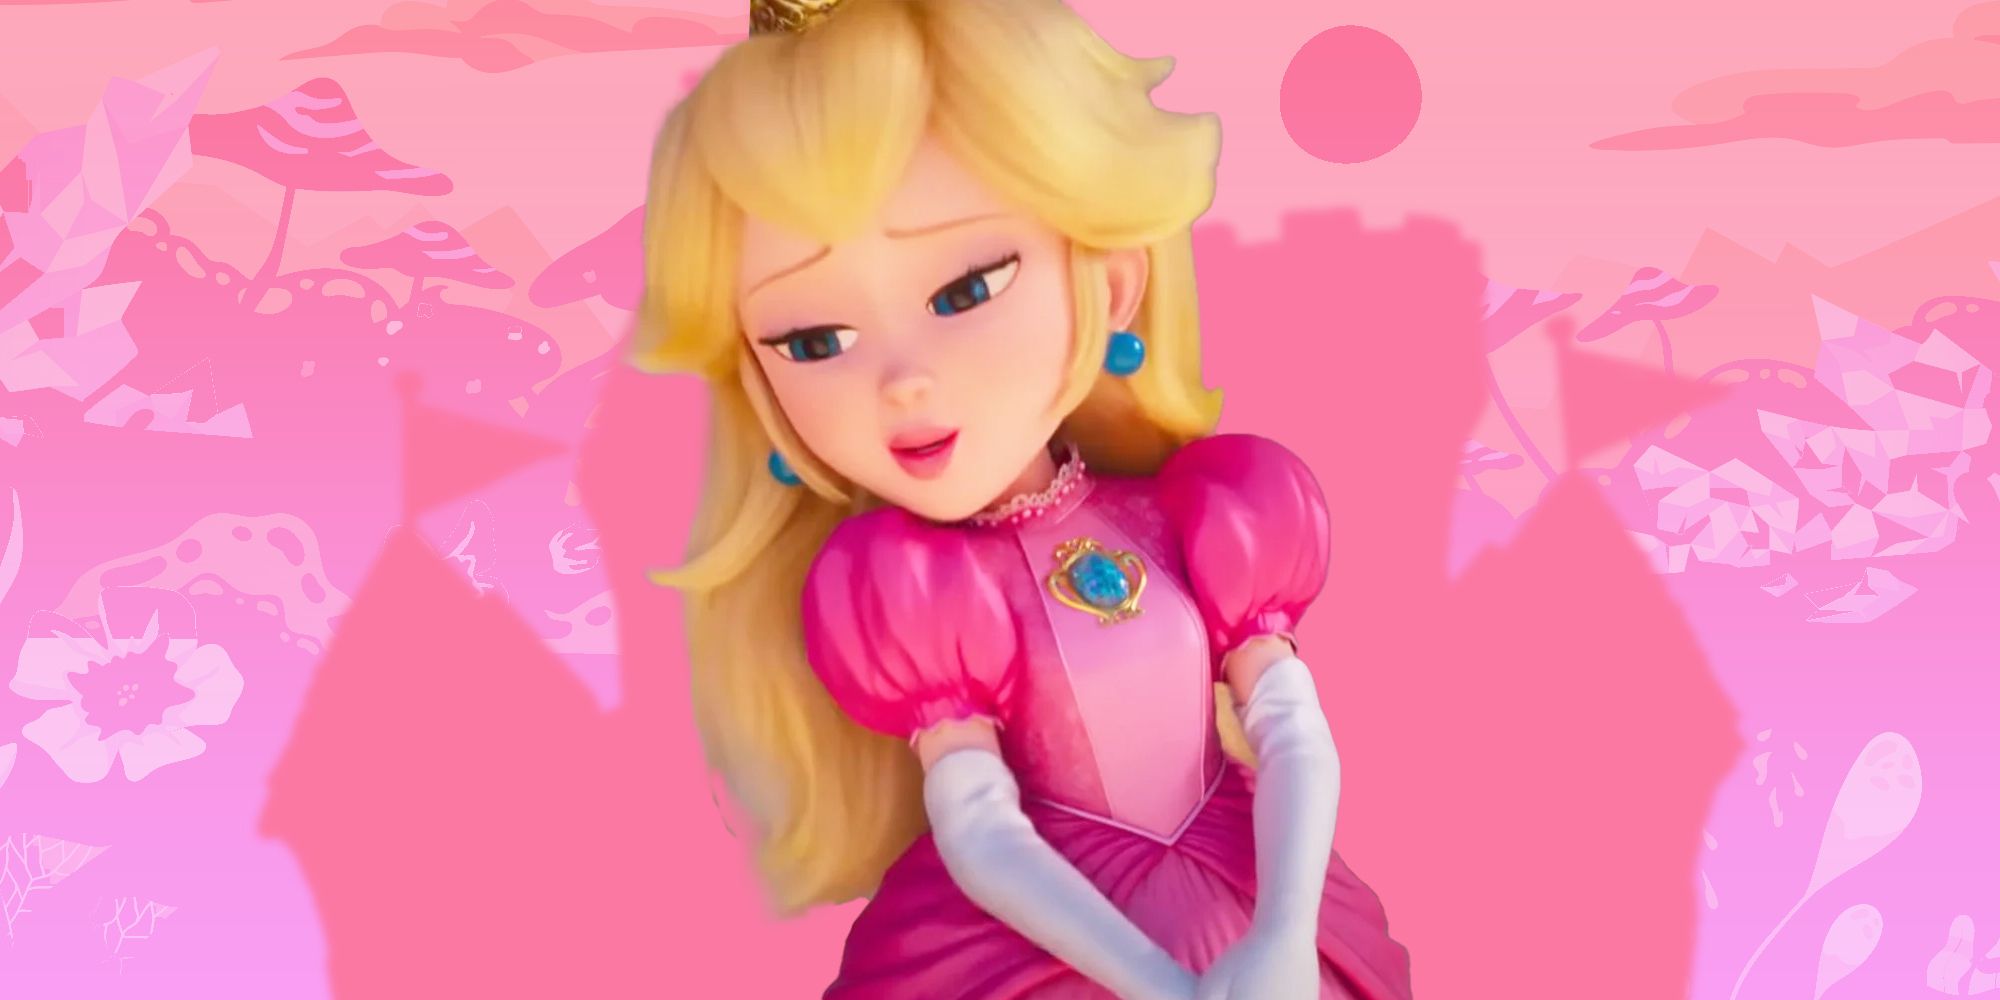 Peach in the Mario Movie against a pink background